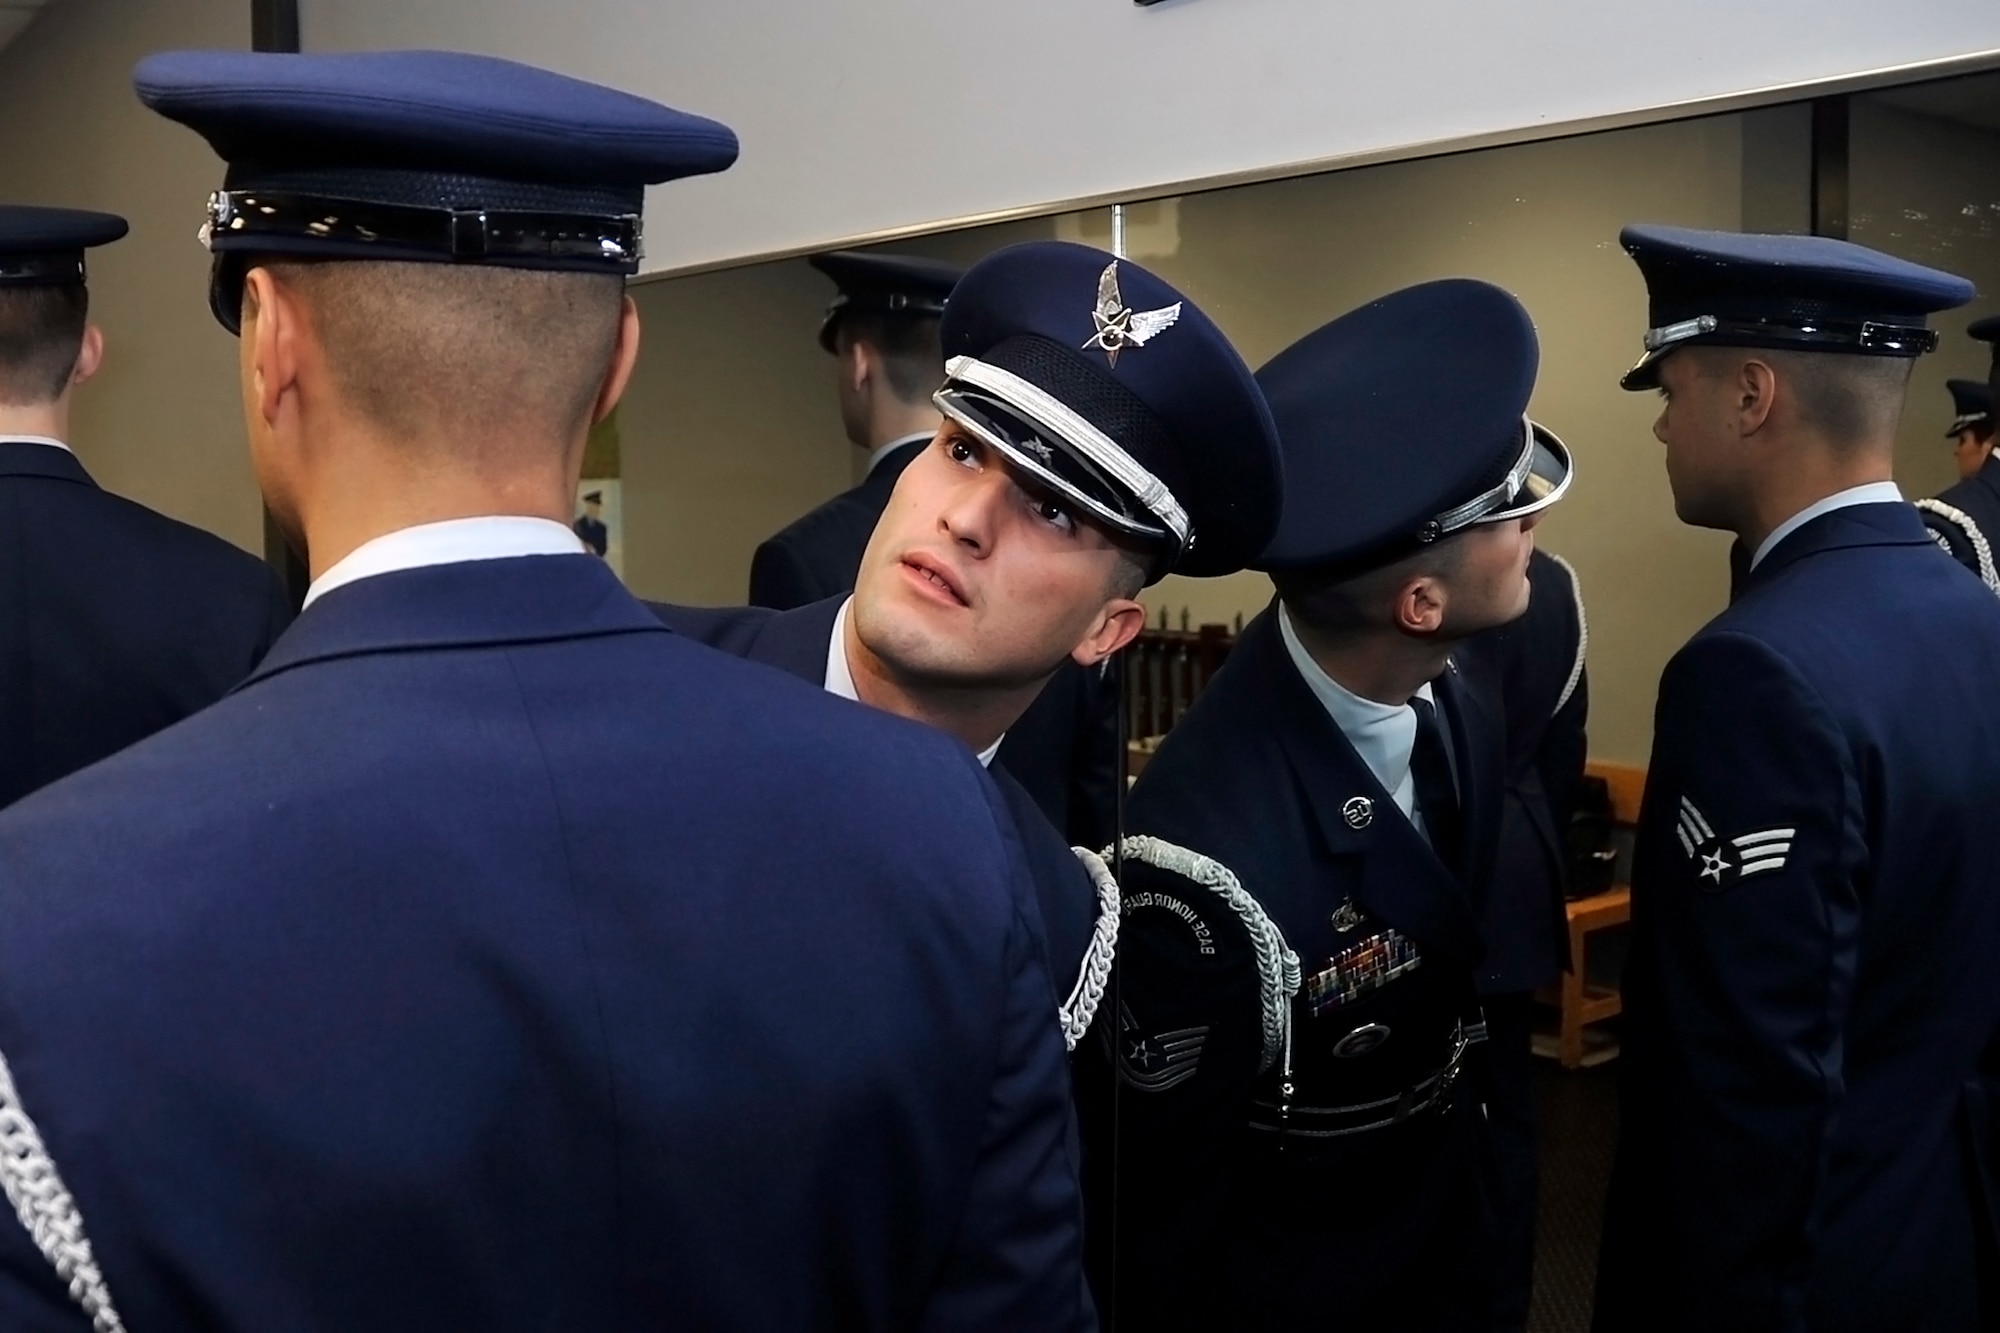 Tech. Sgt. Jared Lacovara, 88th Aerial Port Squadron, performs a uniform inspection on a member of the 87th Air Base Wing honor guard. Lacovara, who was trained by the Air Force honor guard at Bolling Air Force Base, Md., is passing-on that training to his active-duty counterparts. (U.S. Air Force photo by Shawn J. Jones)